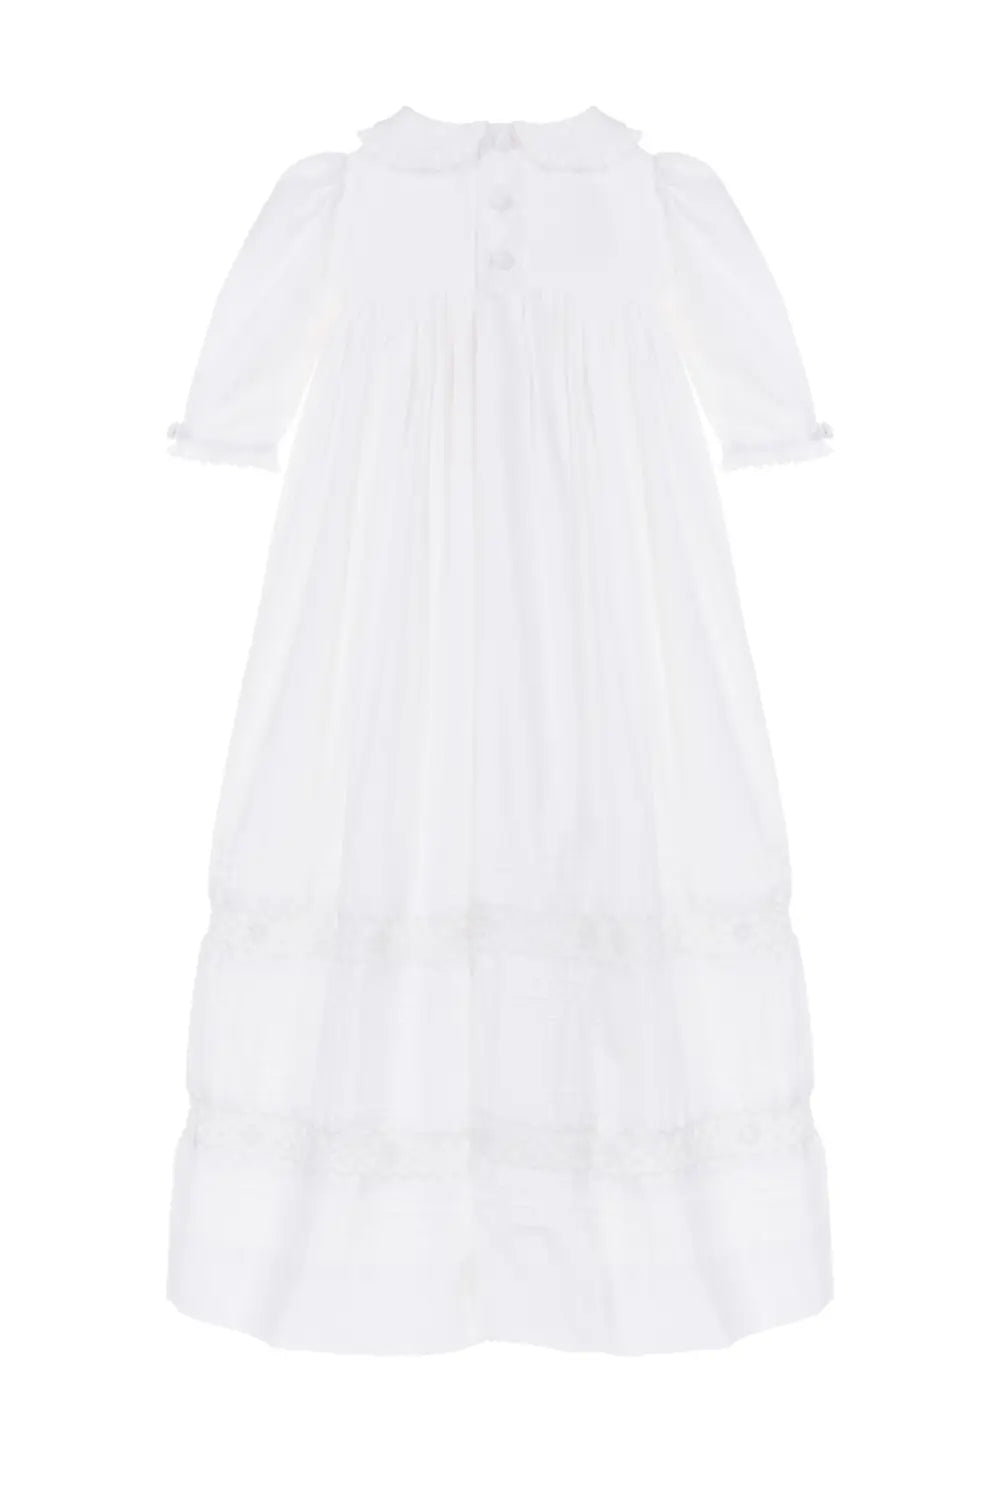 Royal Smocked Christening Gown